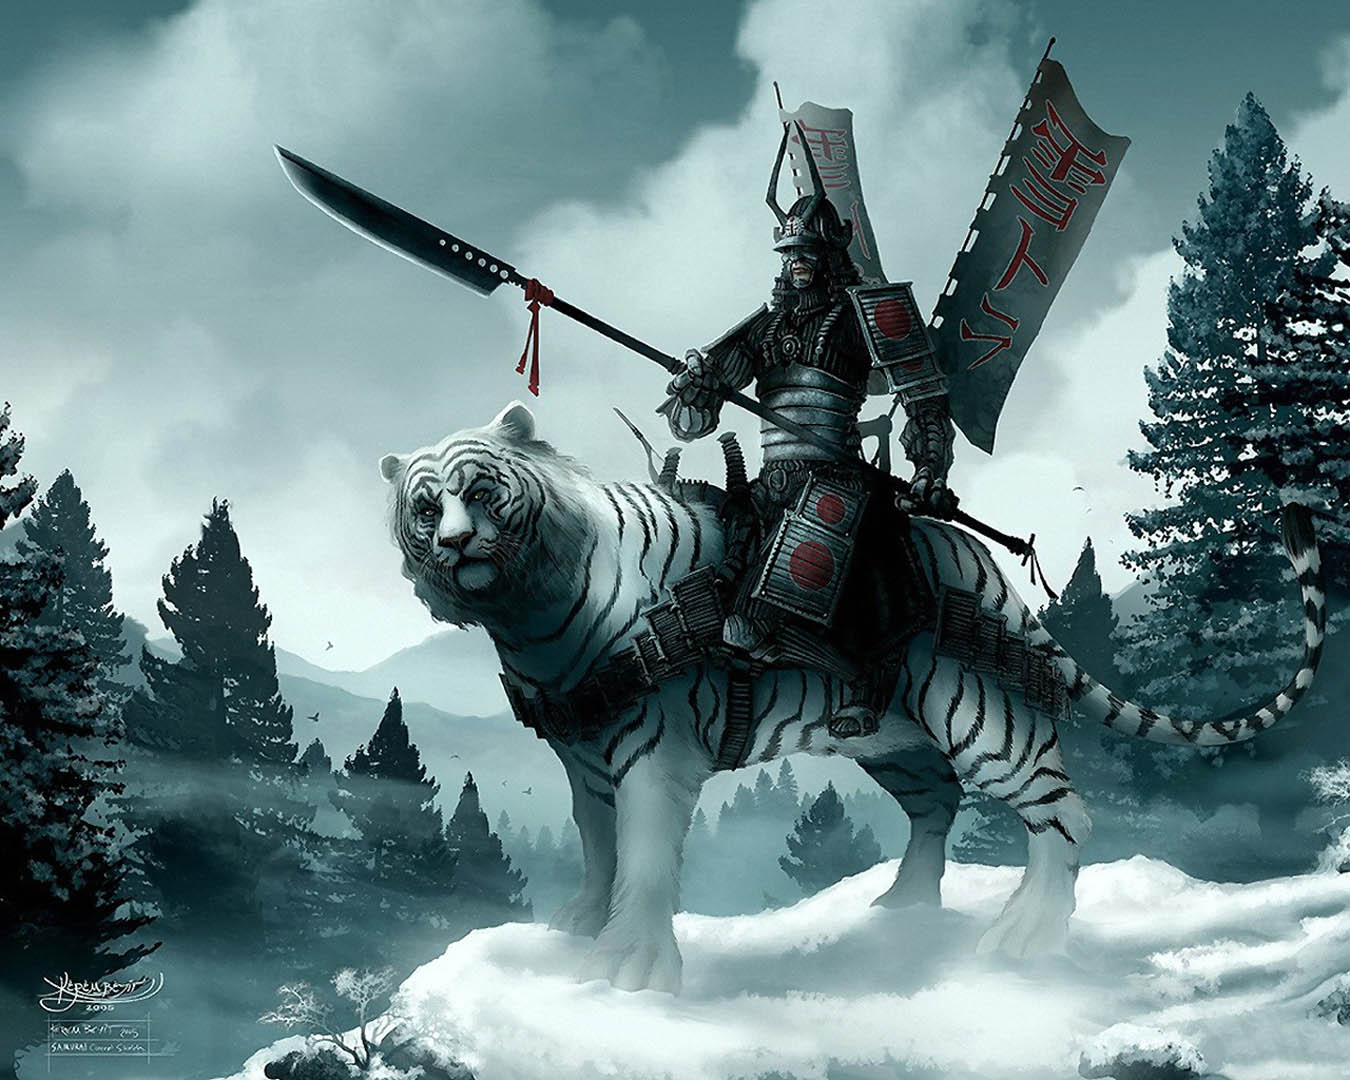 Japanese Warrior Mounted On Snow Tiger - White Tiger - HD Wallpaper 